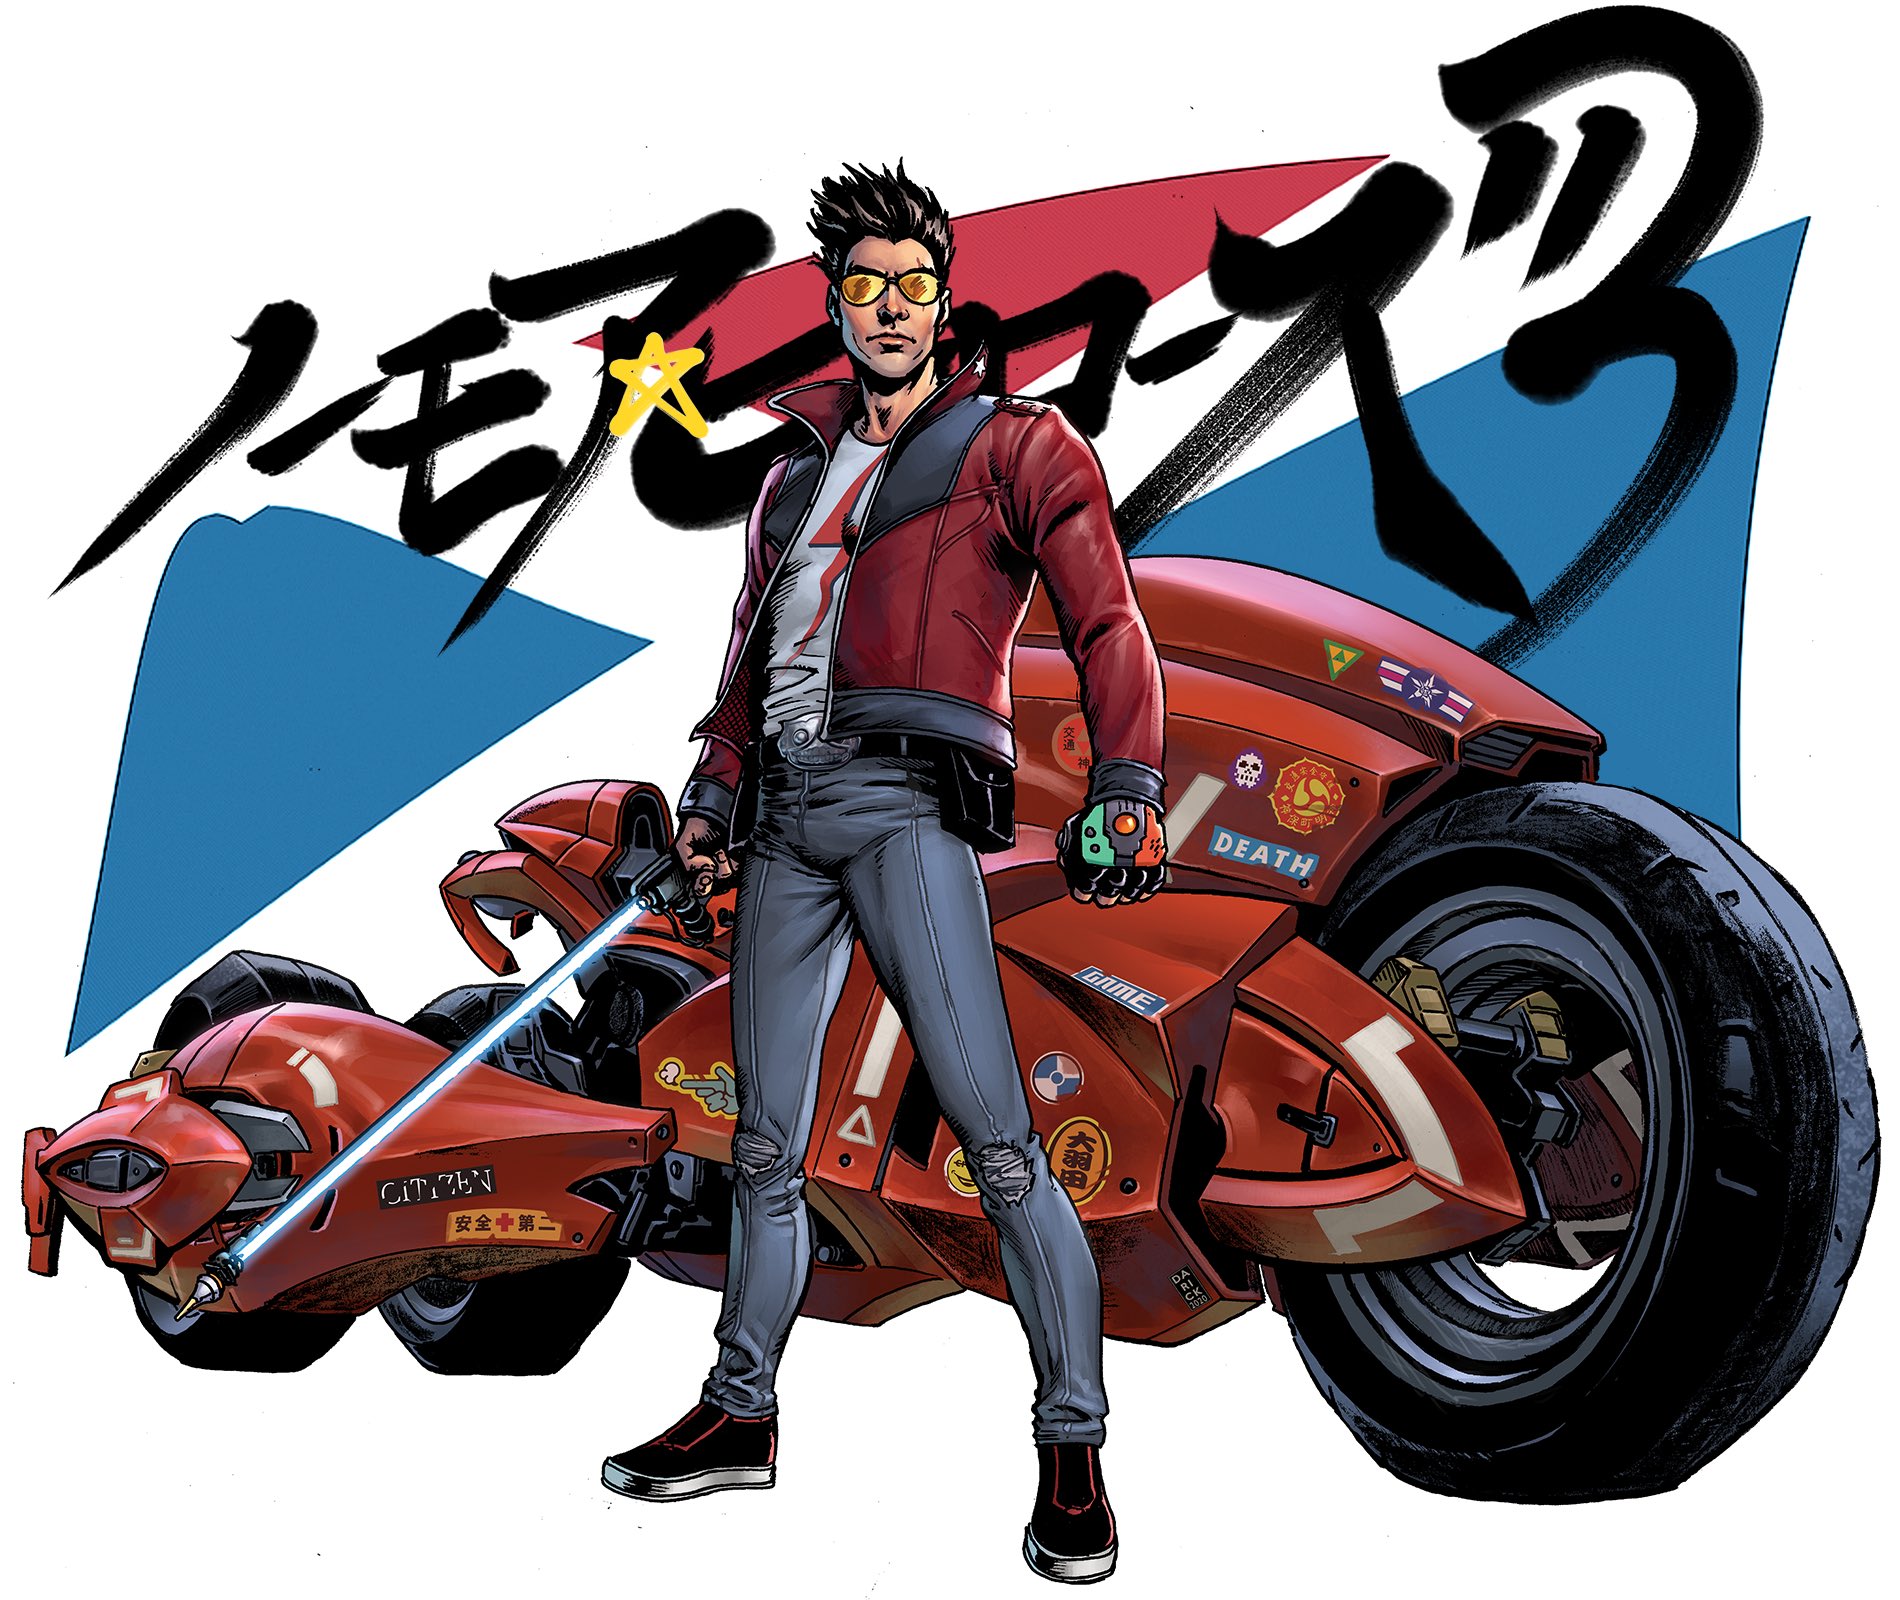 no more heroes 3 release date